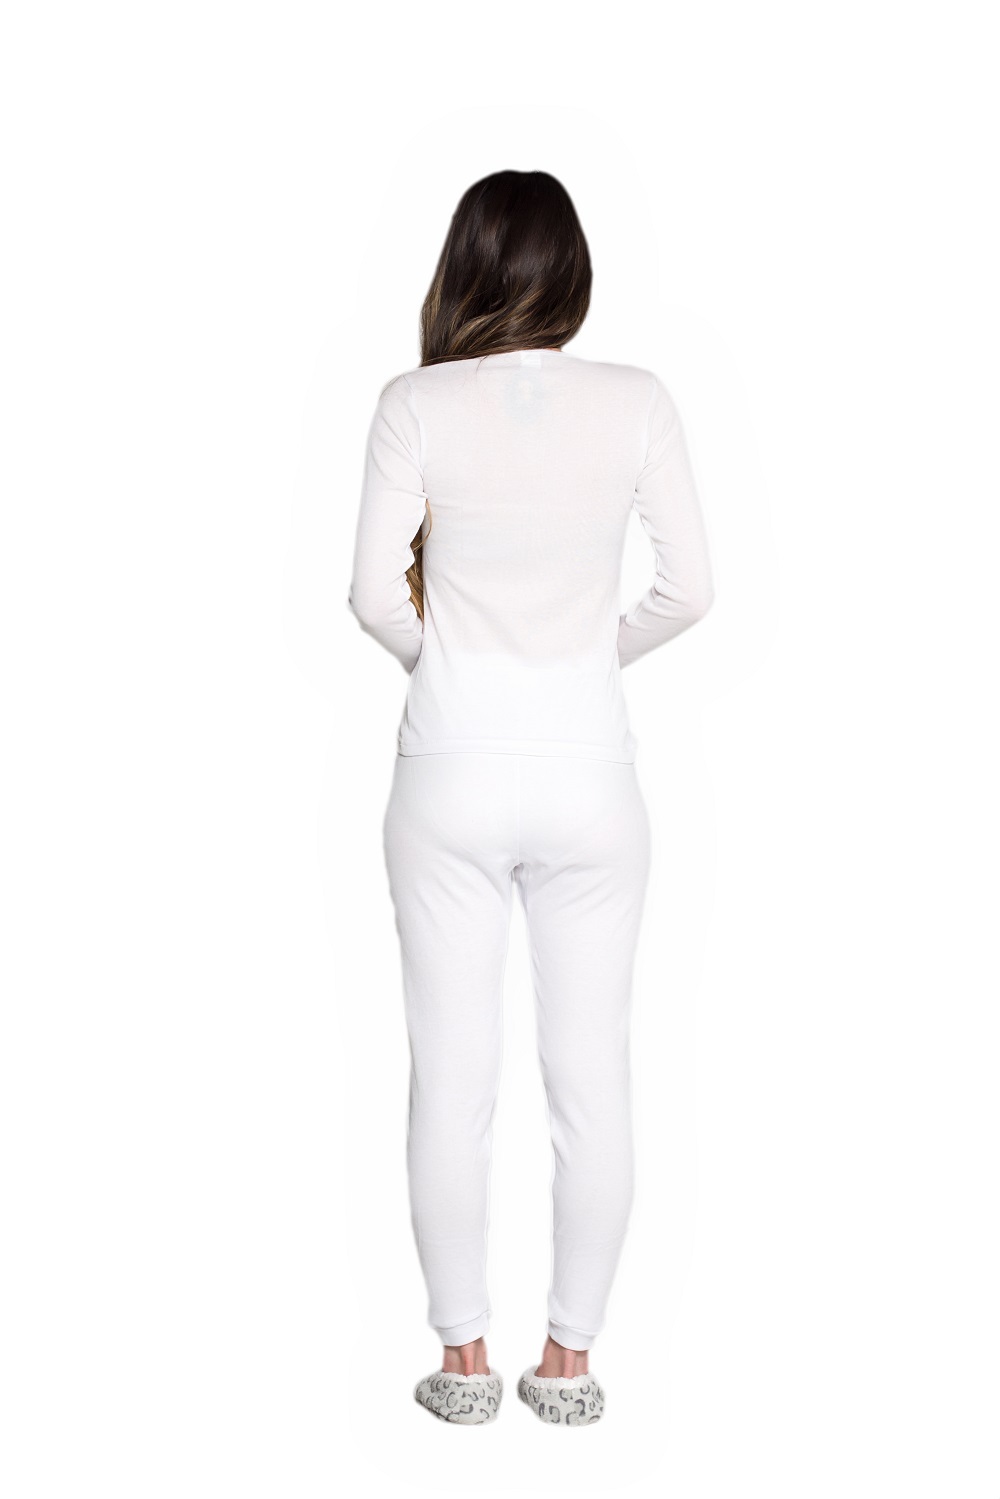 Ladies 2 Pack White Cotton Blend Thermal Underwear Spencer Long Sleeve Top